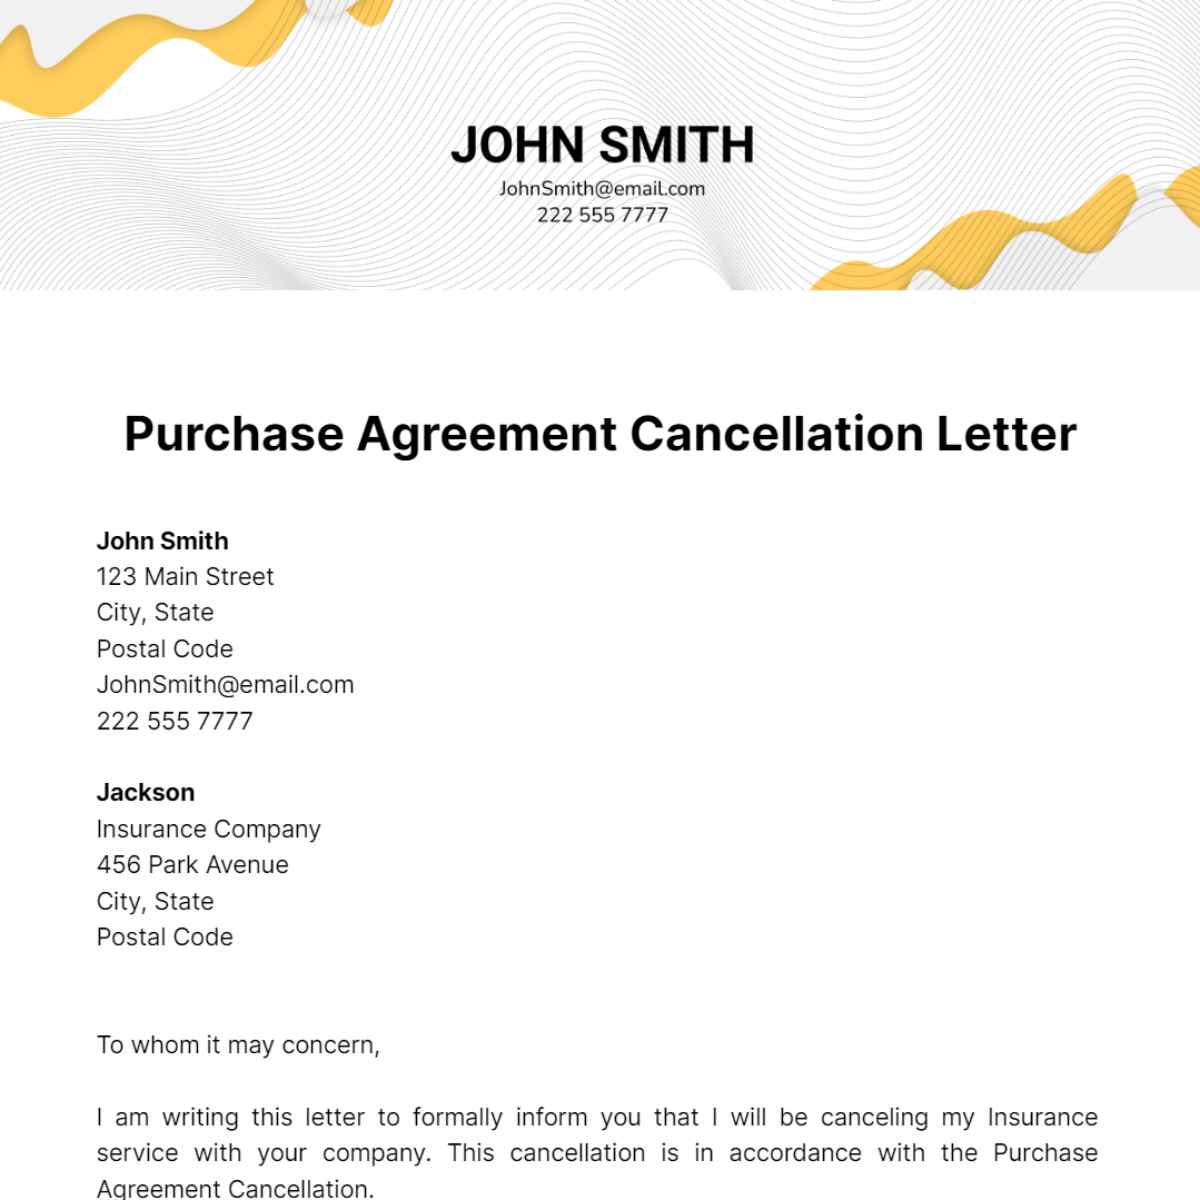 Free Purchase Agreement Cancellation Letter Template